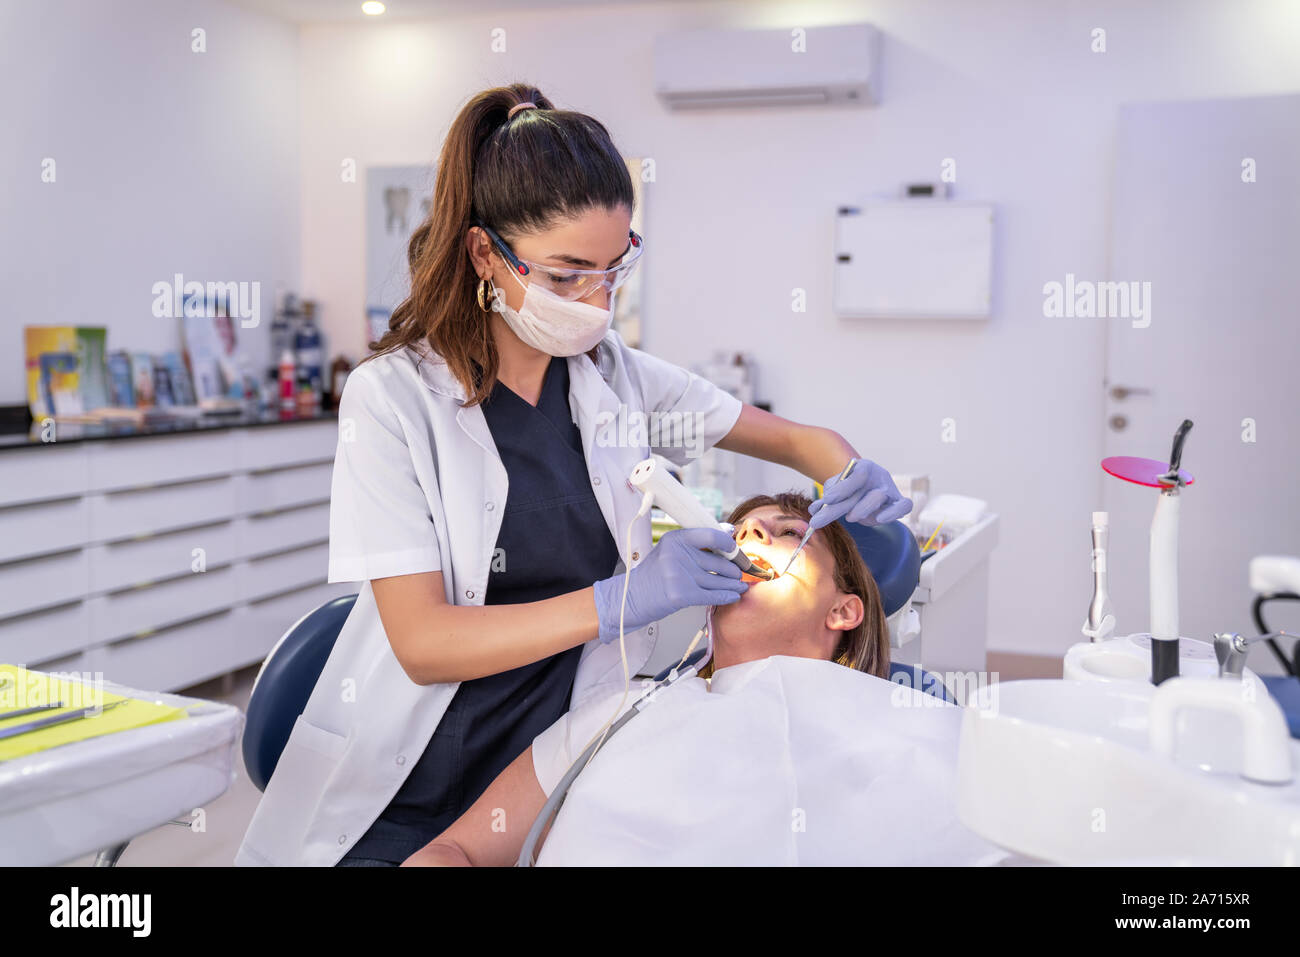 Woman is getting dental treatment in a dental clinic. Stock Photo